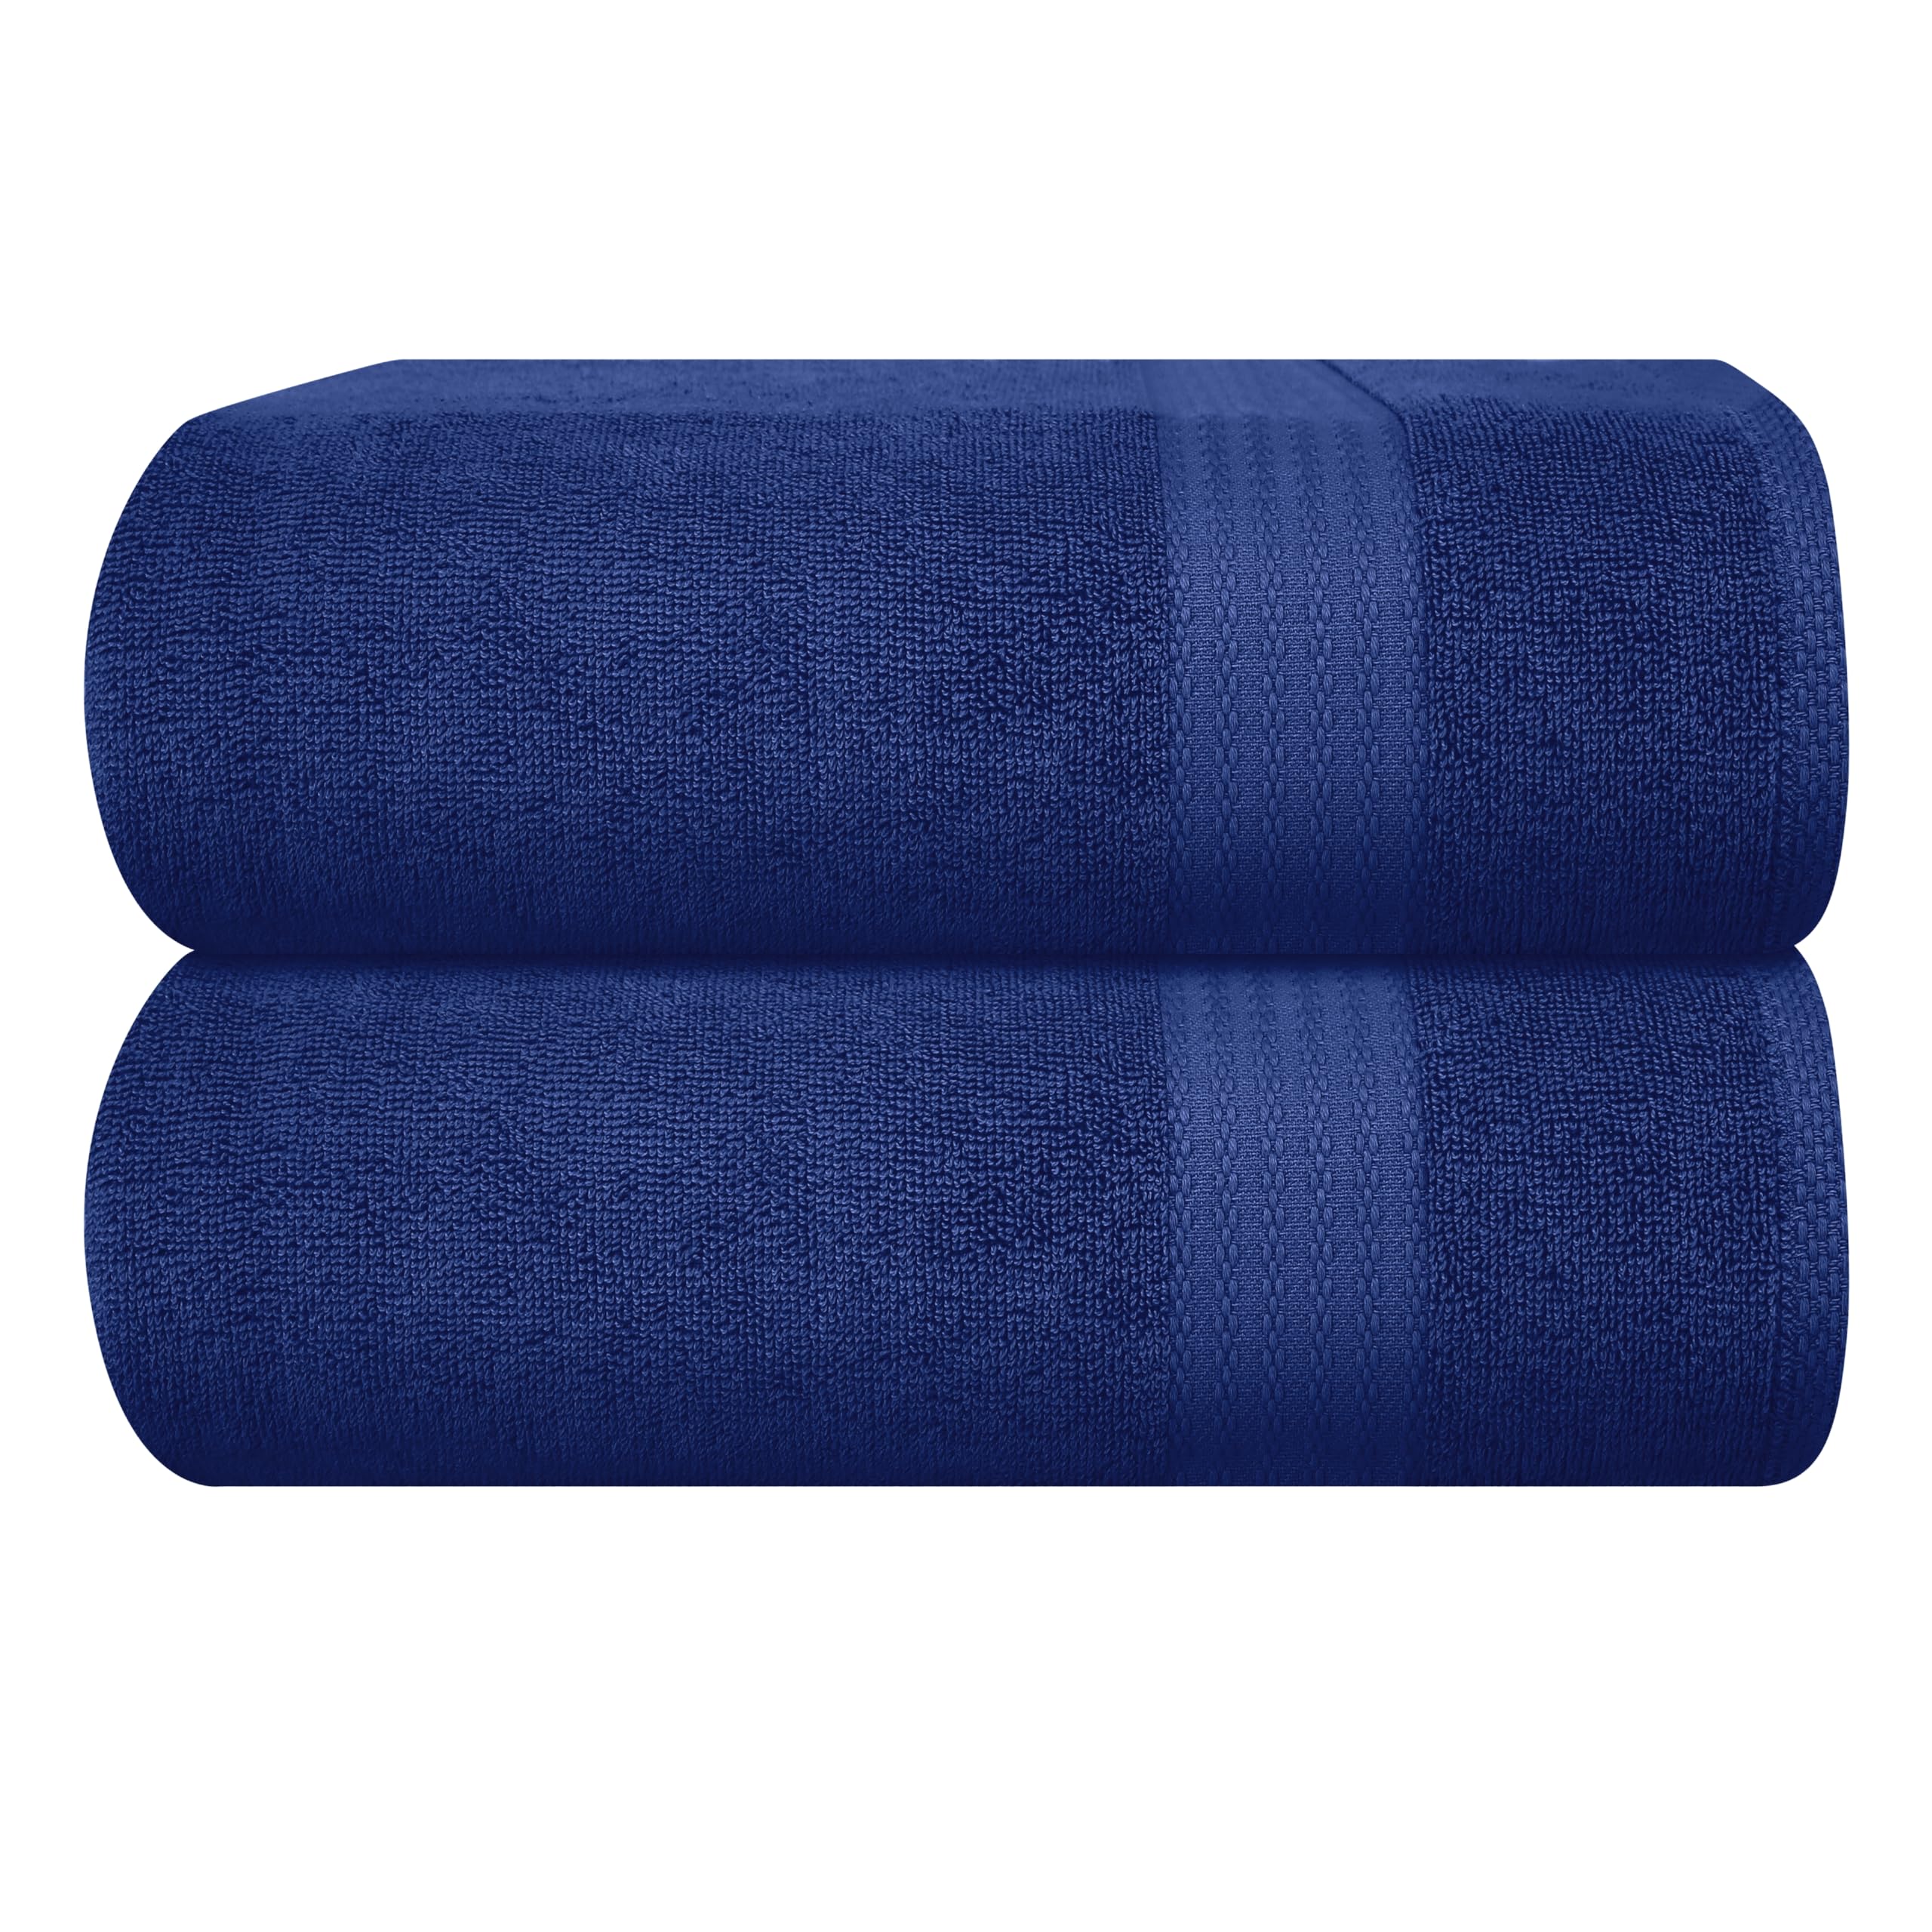 GLAMBURG Premium Cotton Oversized 2 Pack Bath Sheet 35x70-100% Pure Cotton - Ideal for Everyday use - Ultra Soft & Highly Absorbent - Machine Washable - Navy